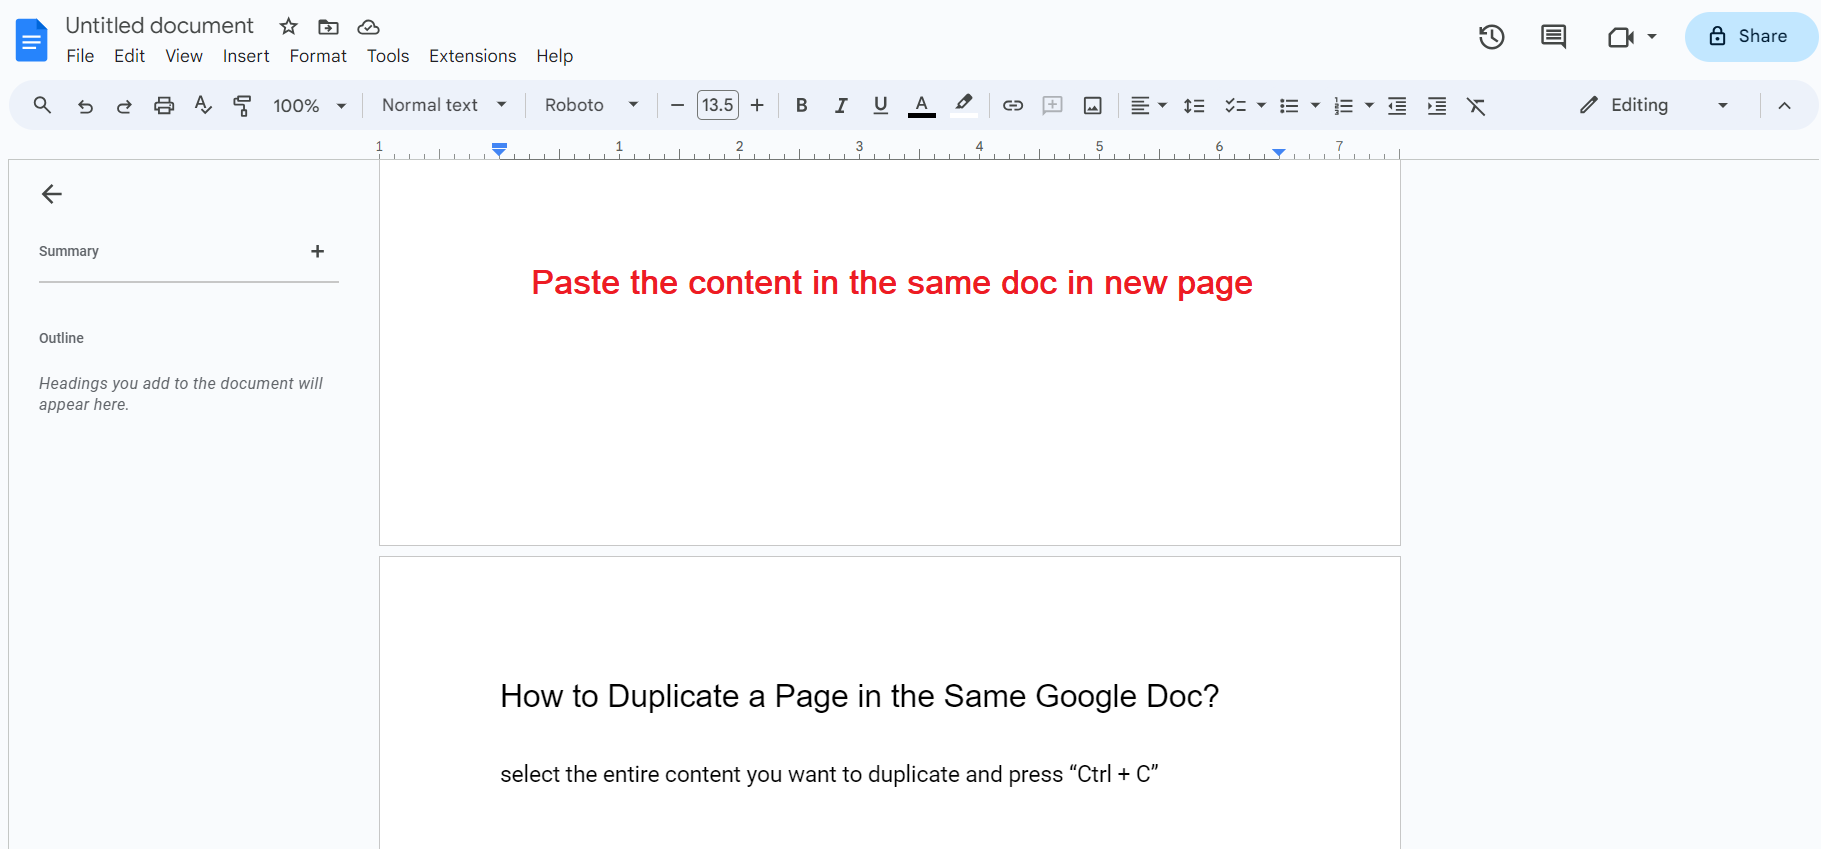 Copy Paste Content in the same Google Doc